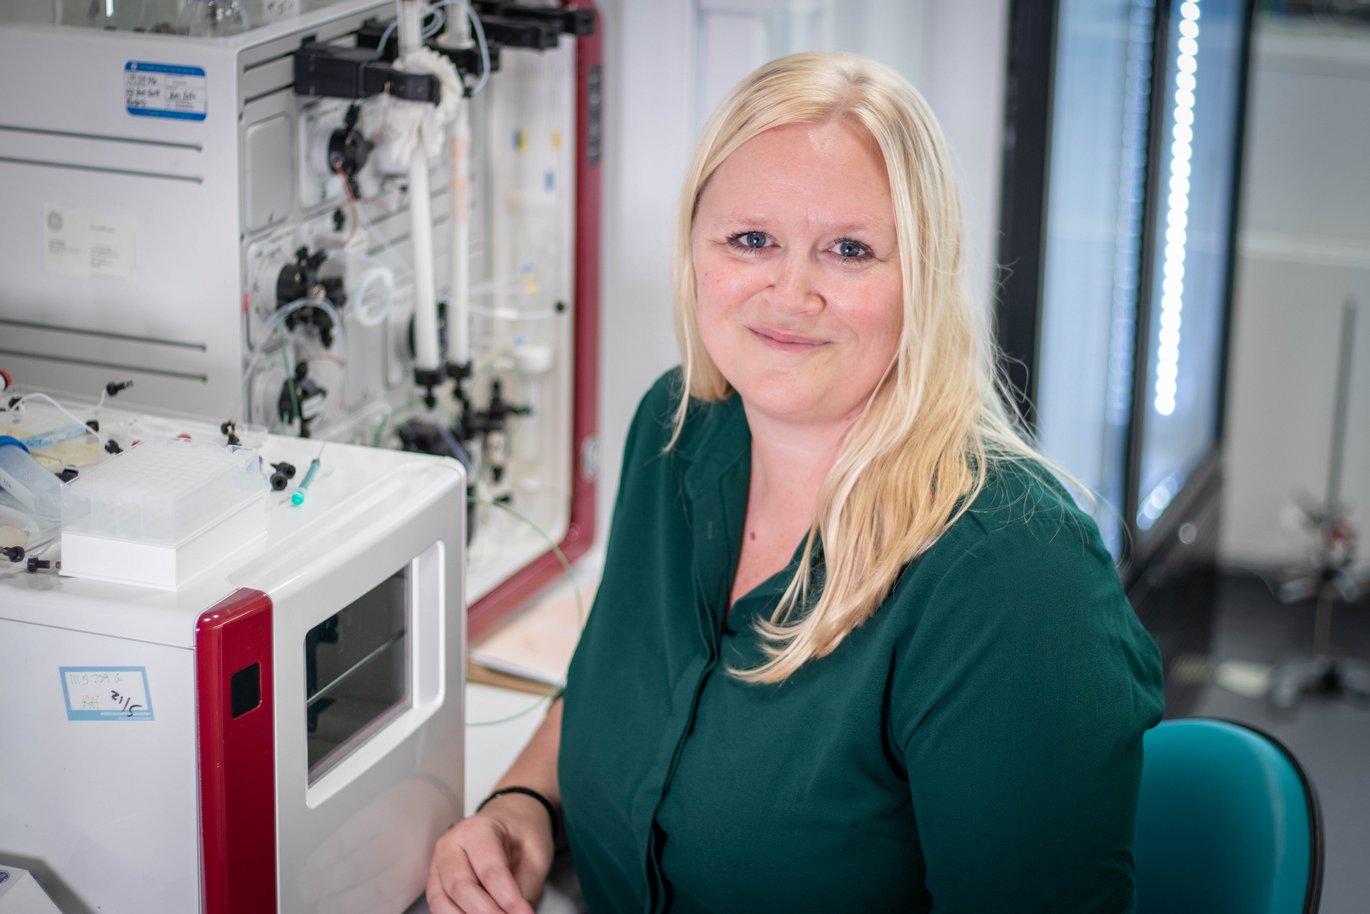 : Anne Troldborg from the Department of Clinical Medicine and the Department of Biomedicine receives the Skou Award 2022 for her excellent research into the innate immune system. 